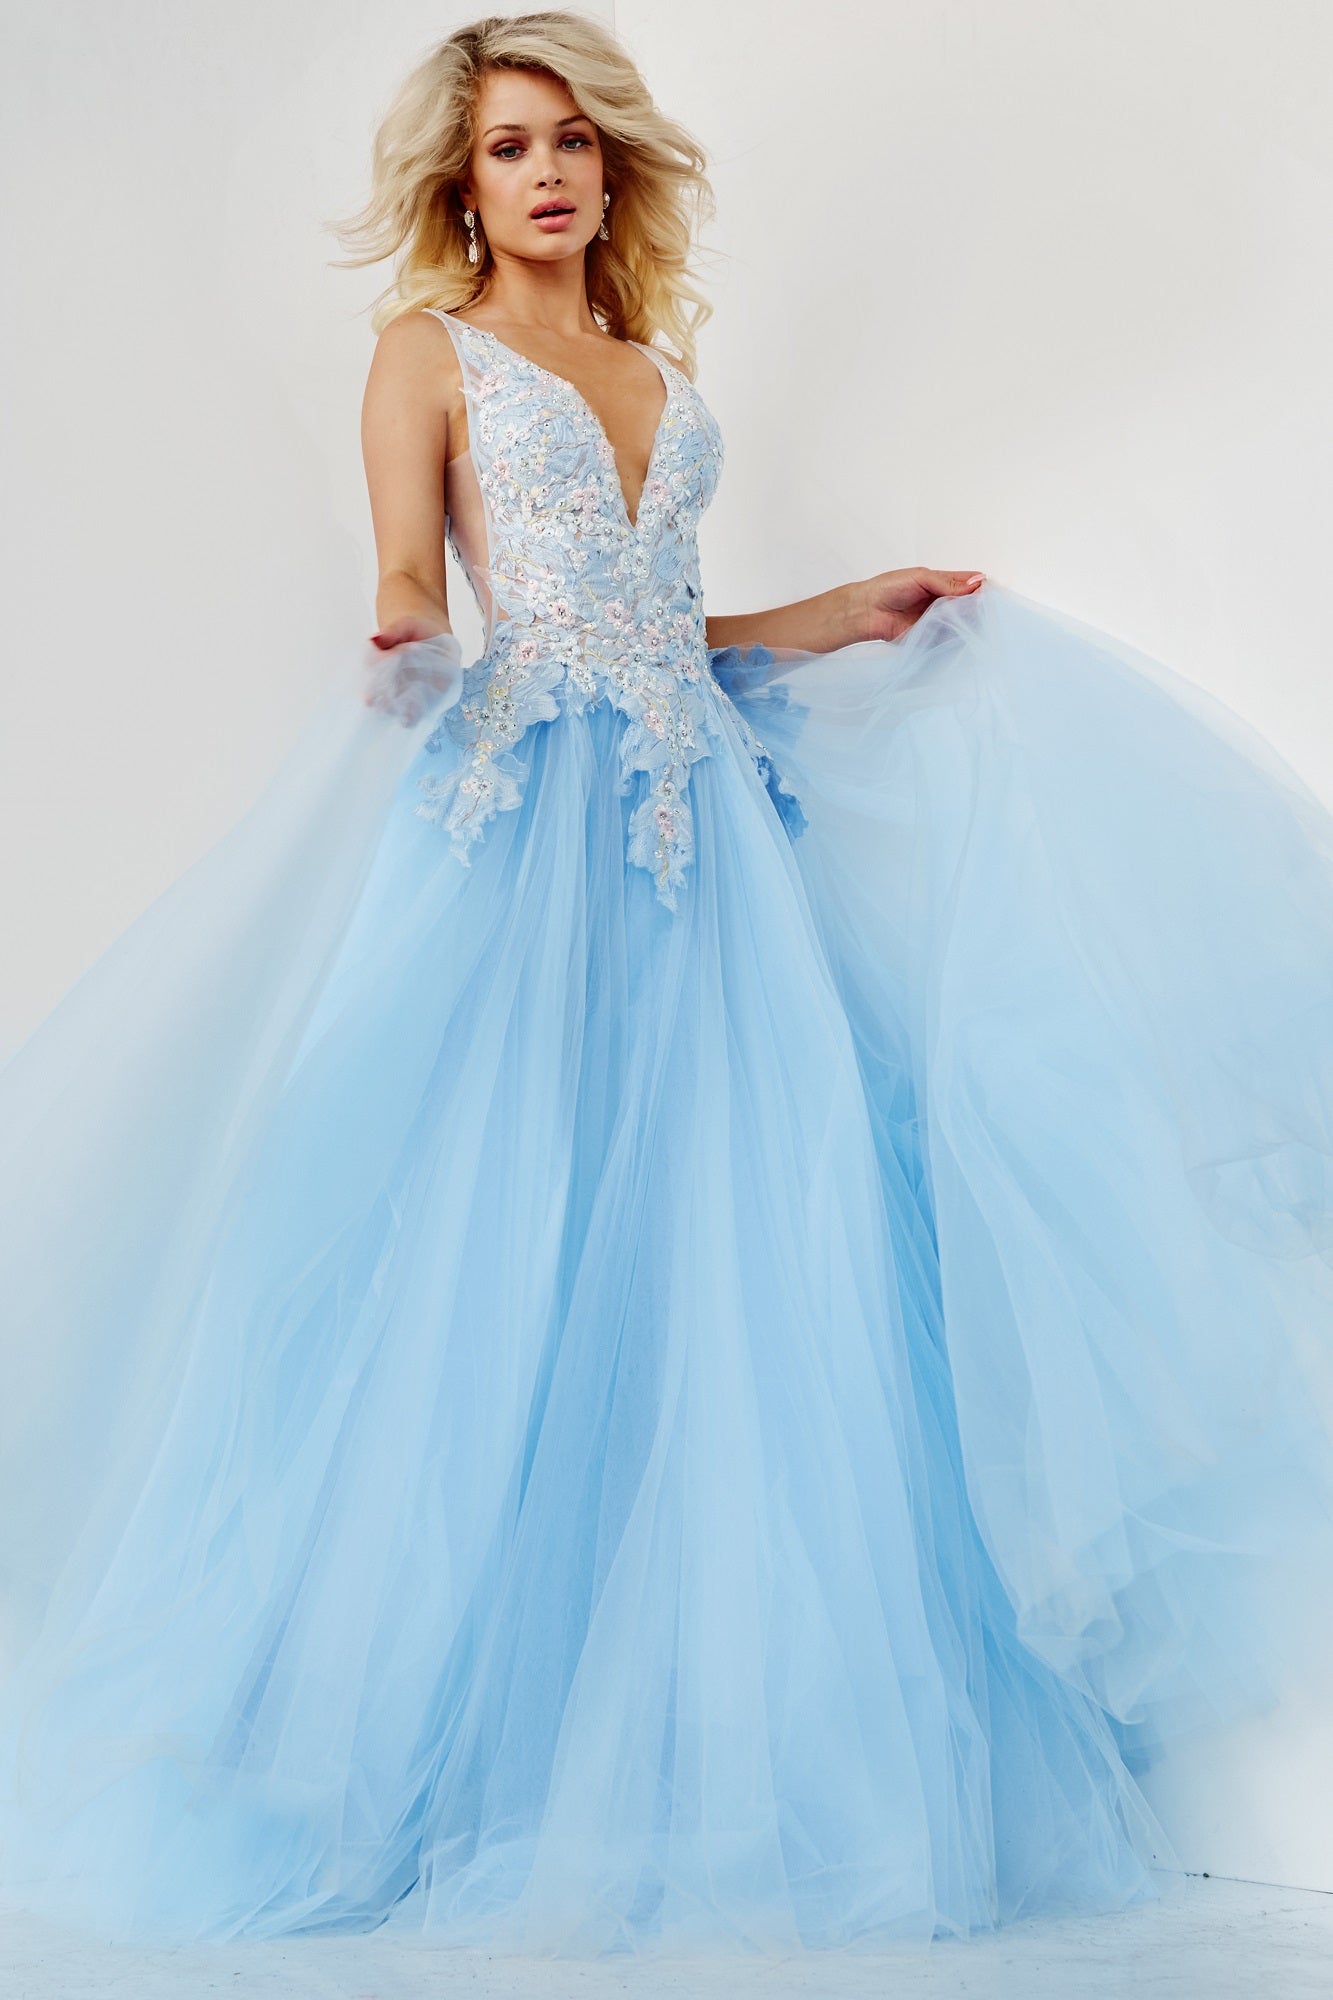 Jovani Prom Dress 06808 Light Blue Floral Lace Long Ball gown